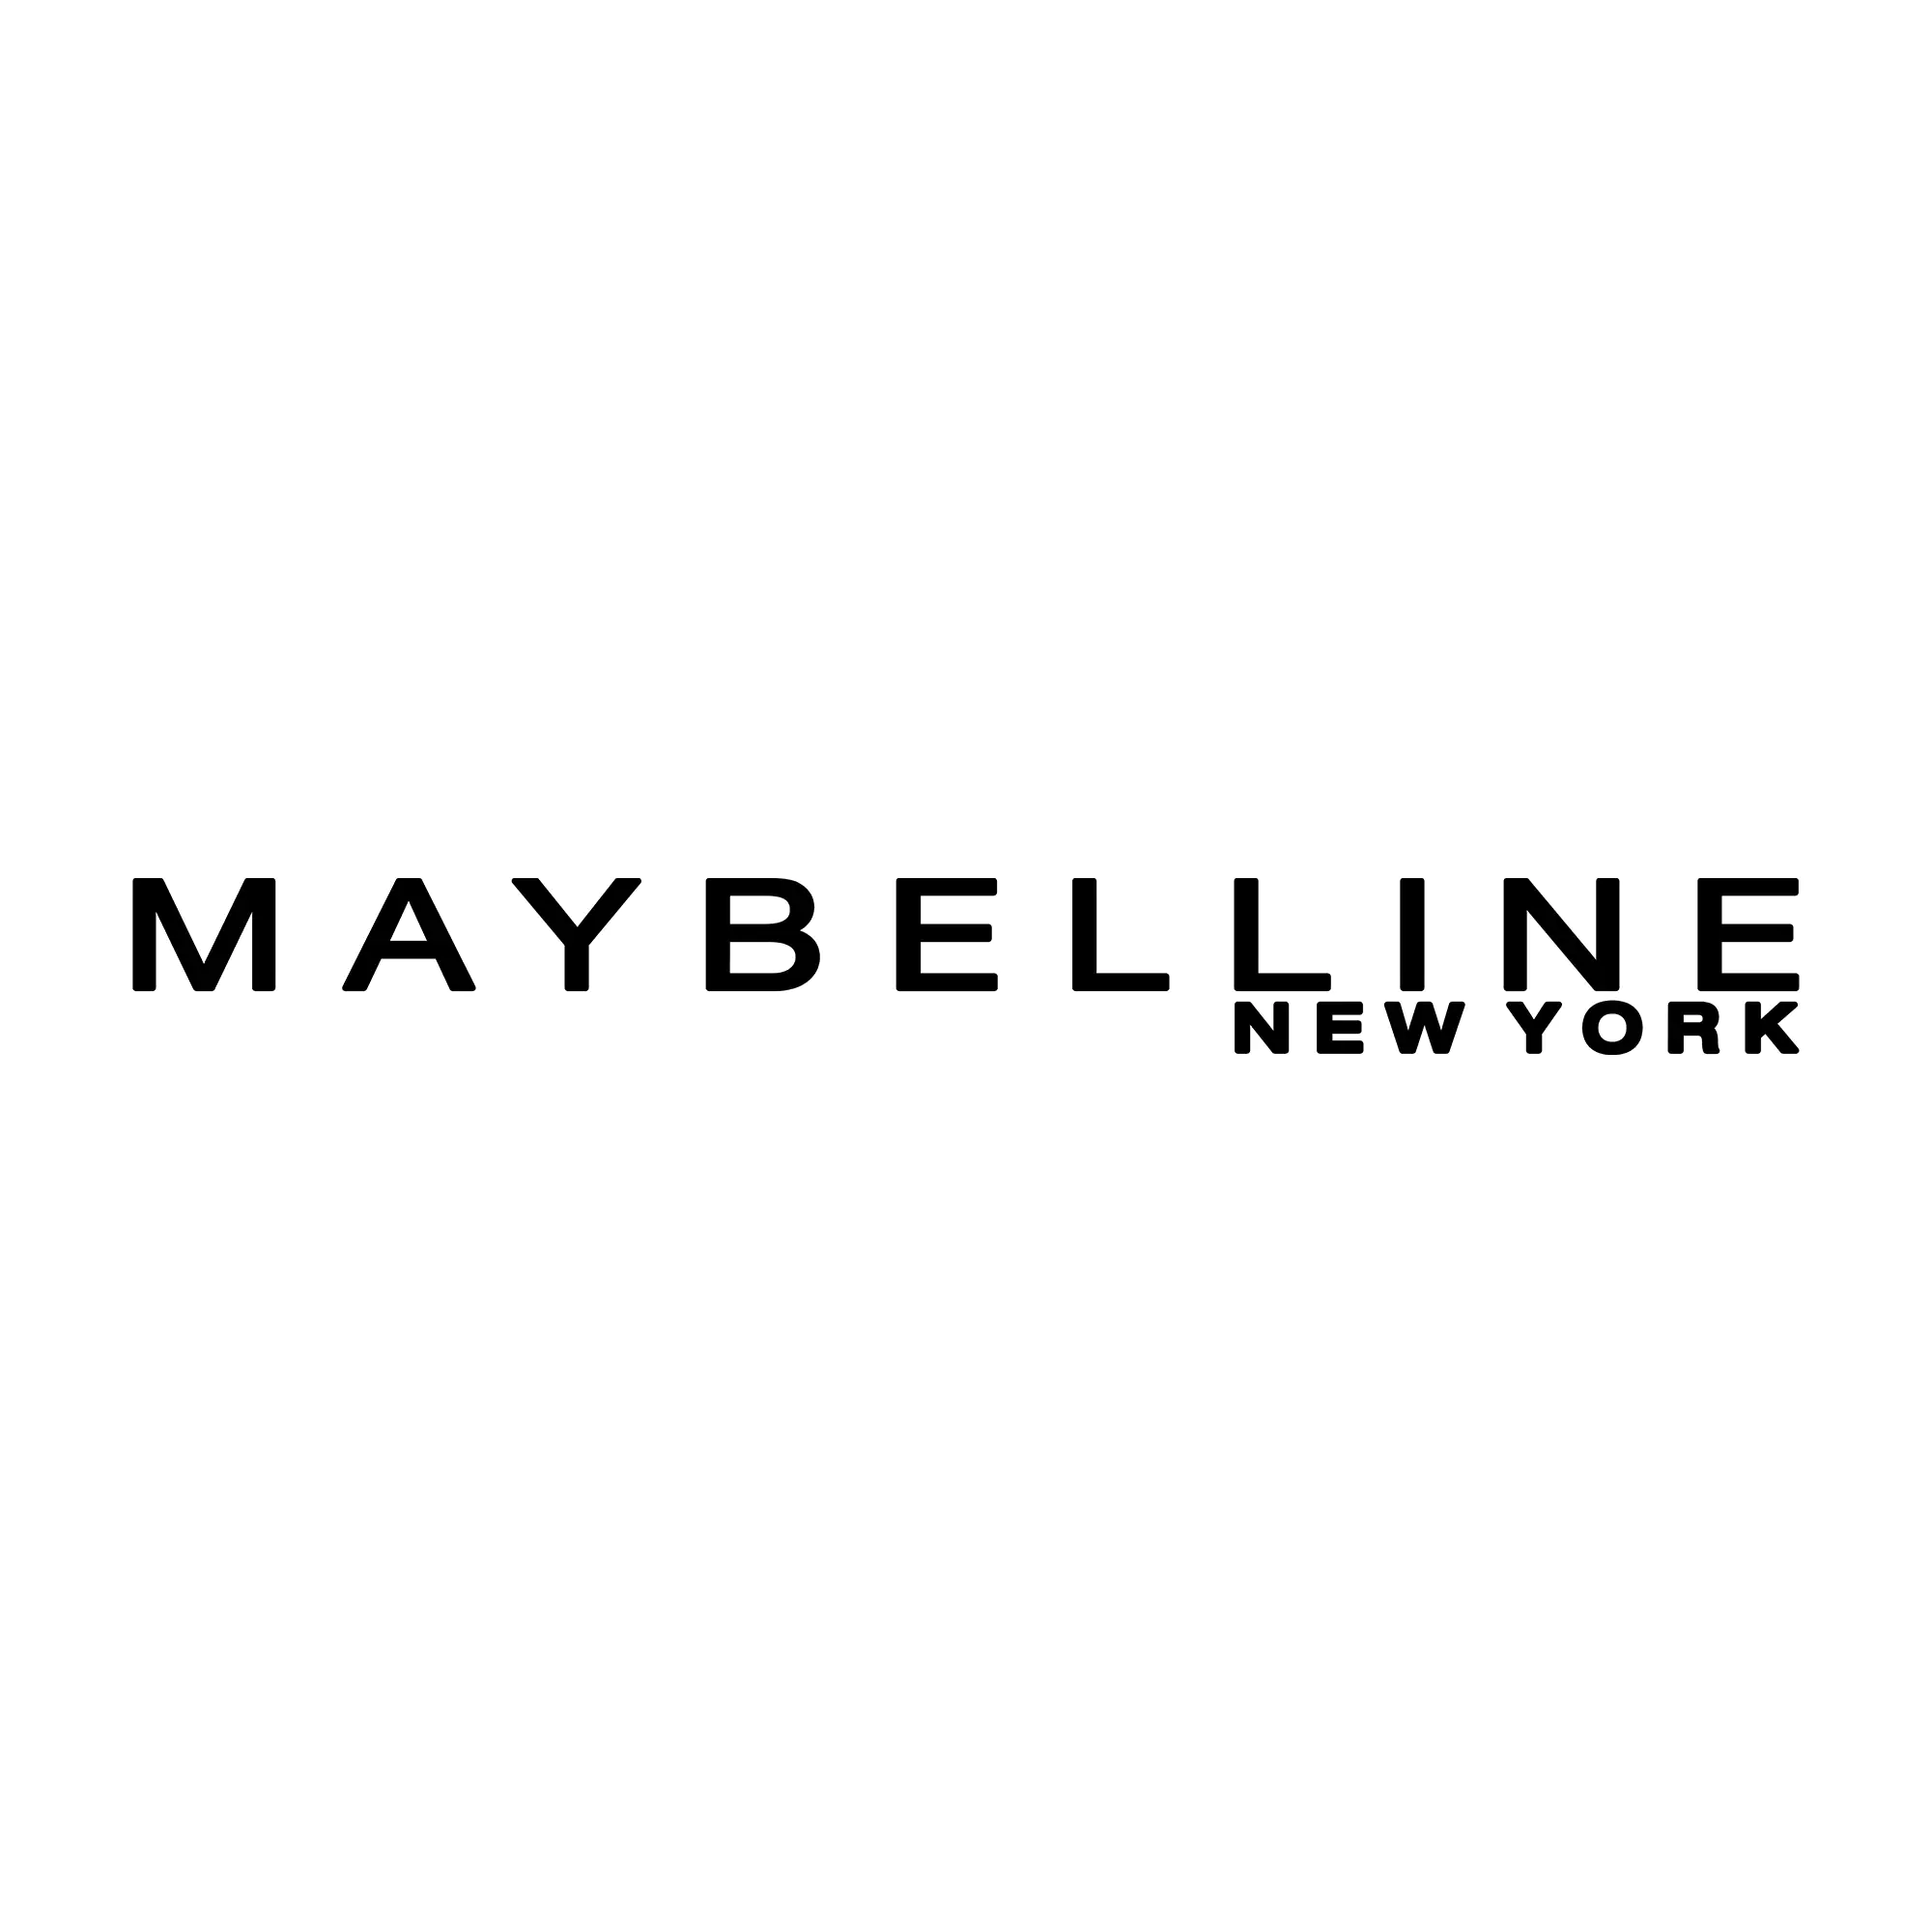 Maybelline Μάσκαρα The Falsies Surreal Very Black No 01 10ml - Femme Fatale - 